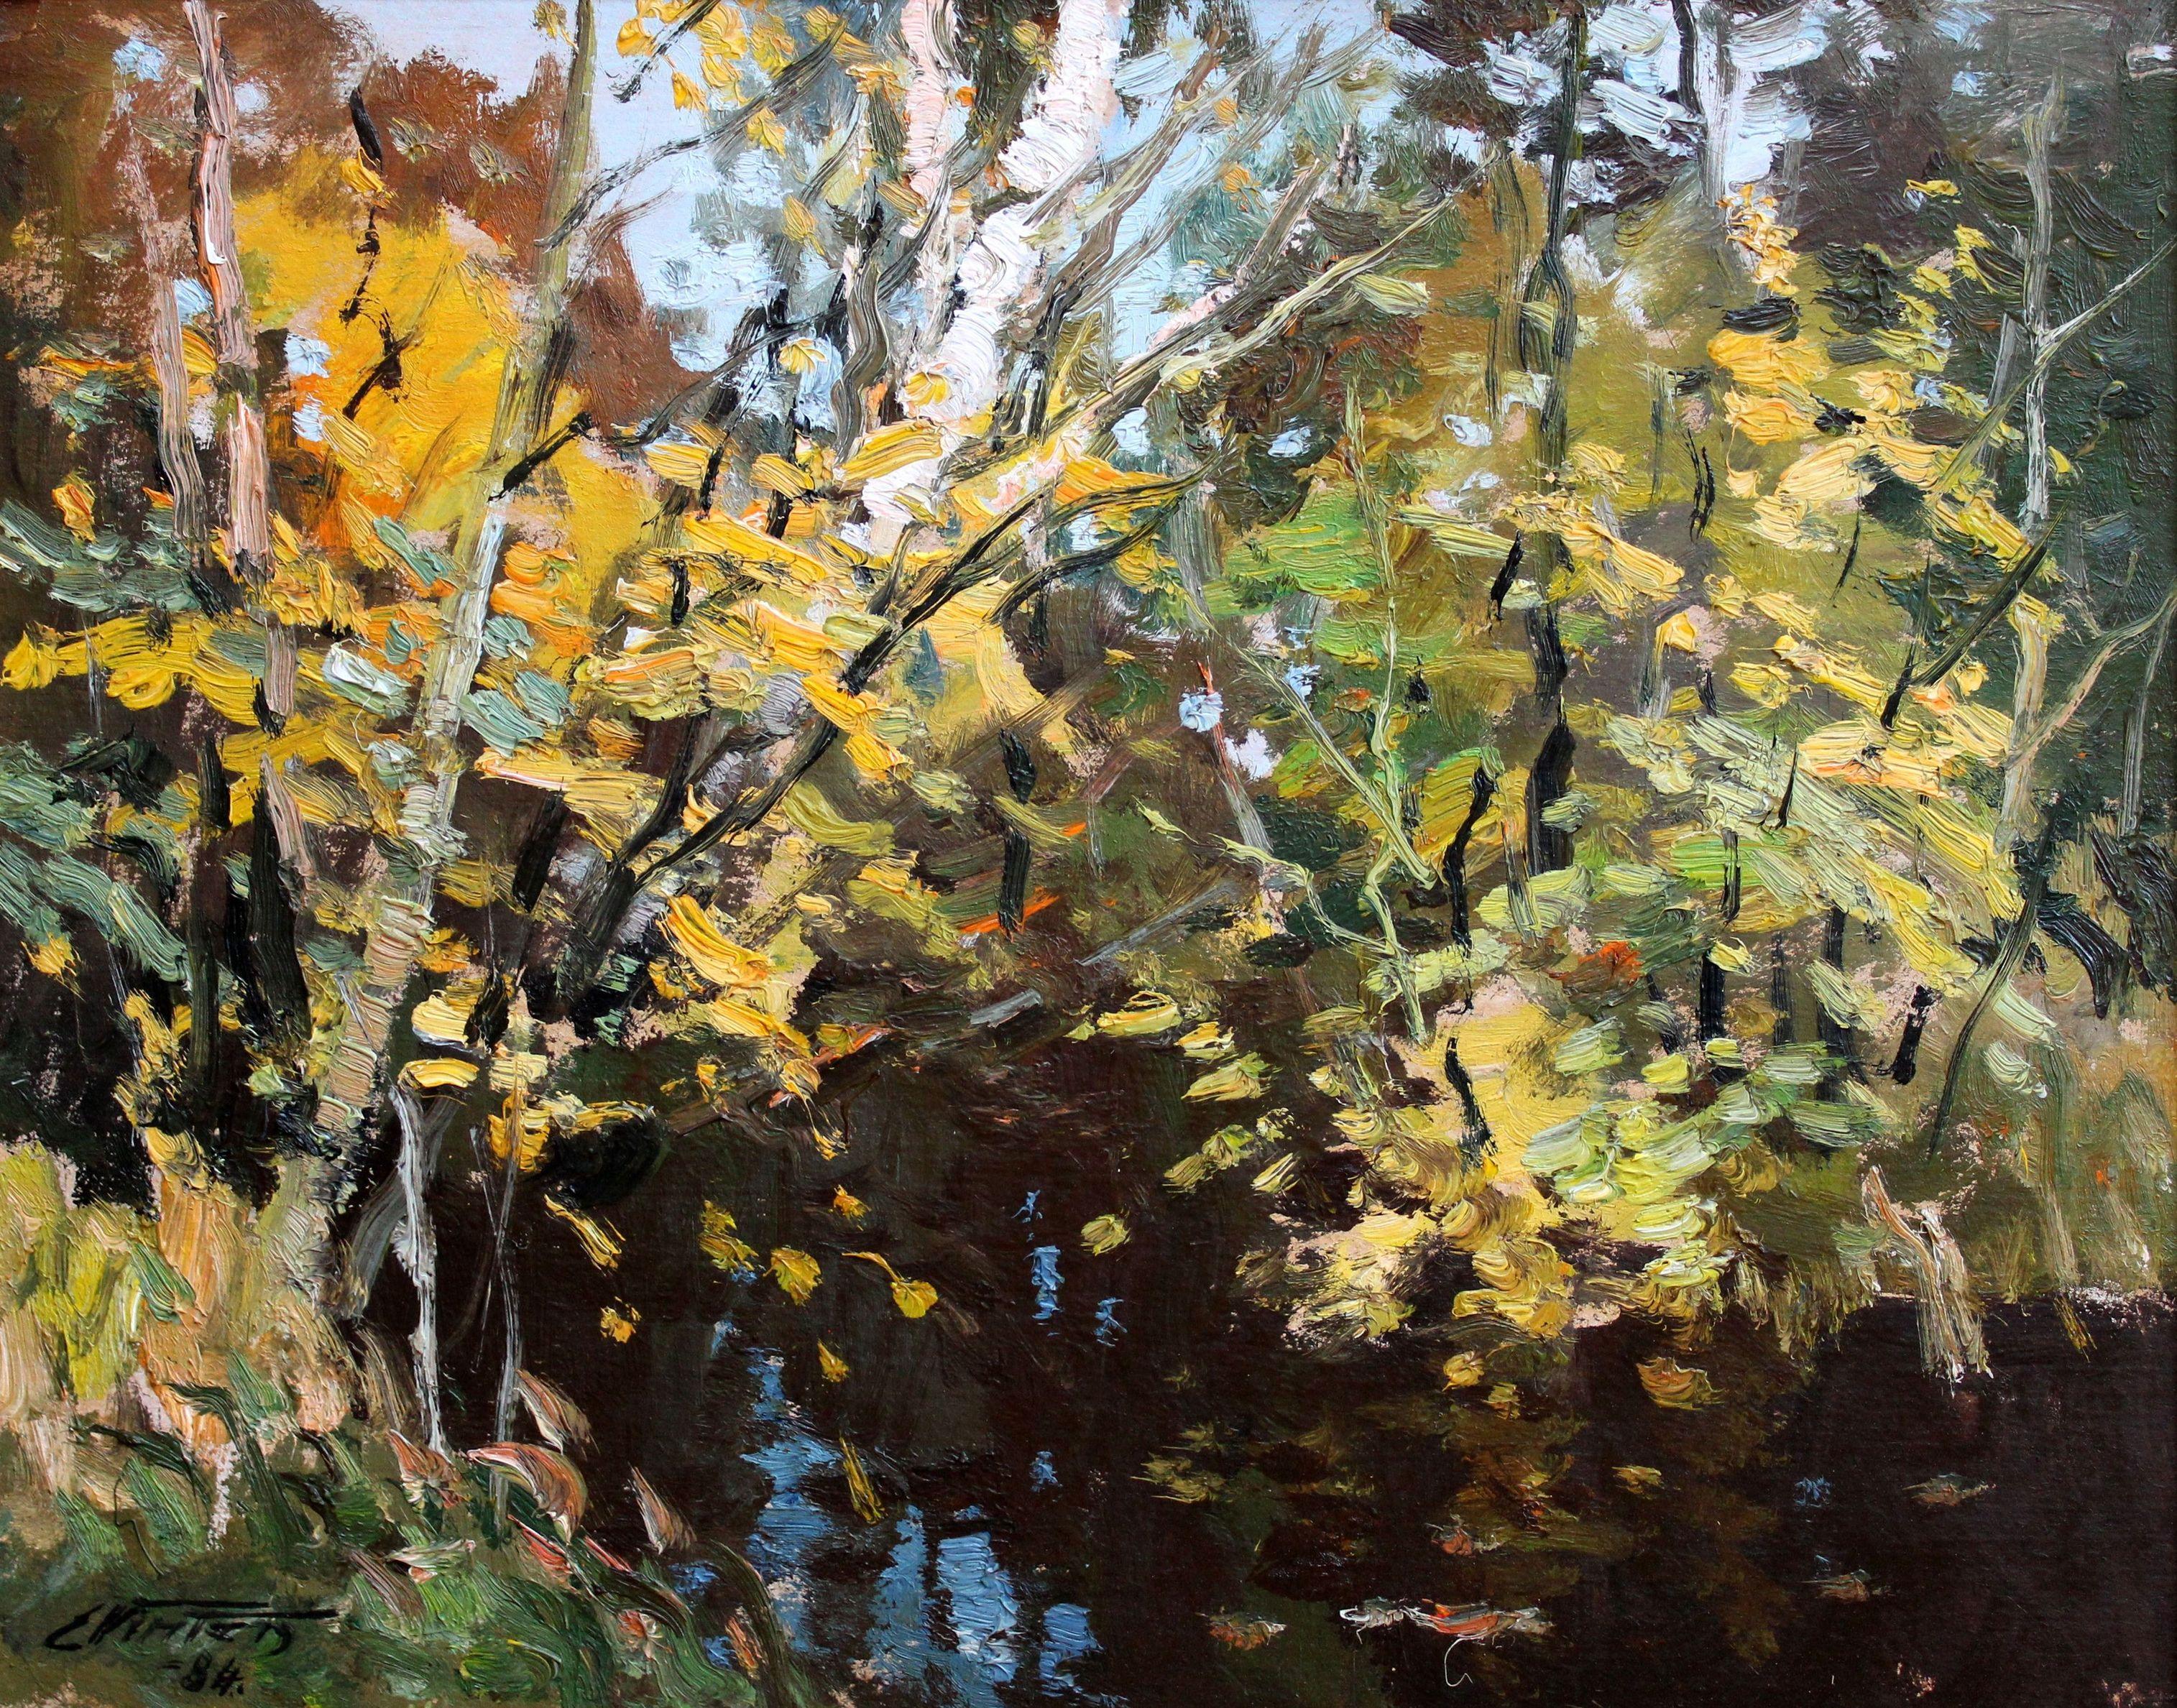 River in autumn. 1984, cardboard, oil, 40x50 cm - Painting by Edgars Vinters